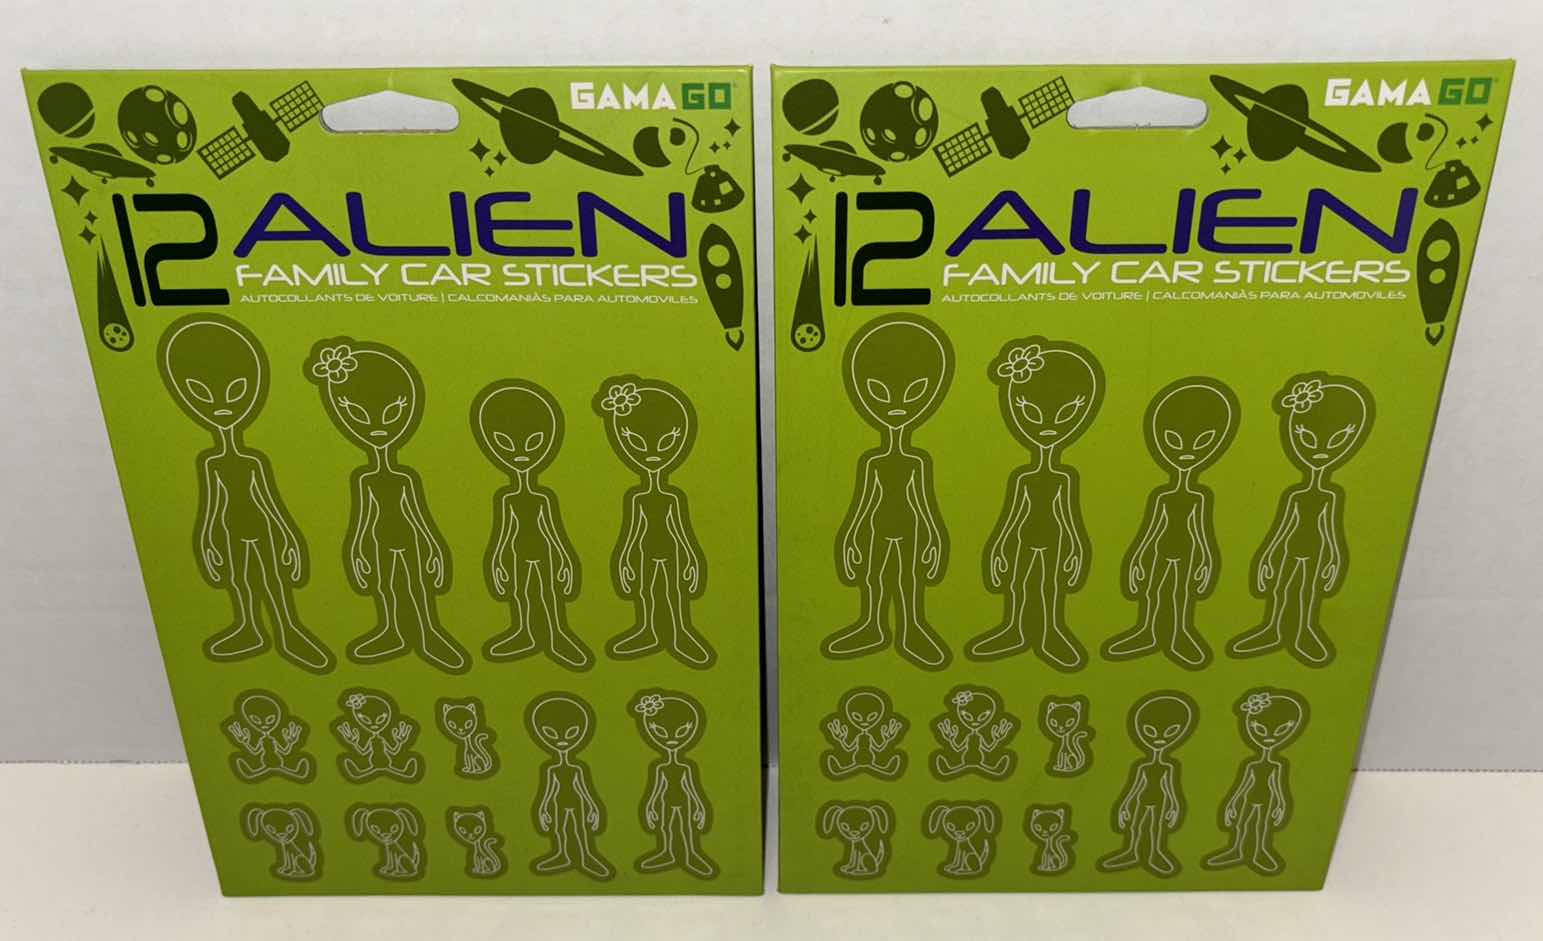 Photo 1 of NEW GAMA GO 12 ALIEN FAMILY CAR STICKERS PACK (2)